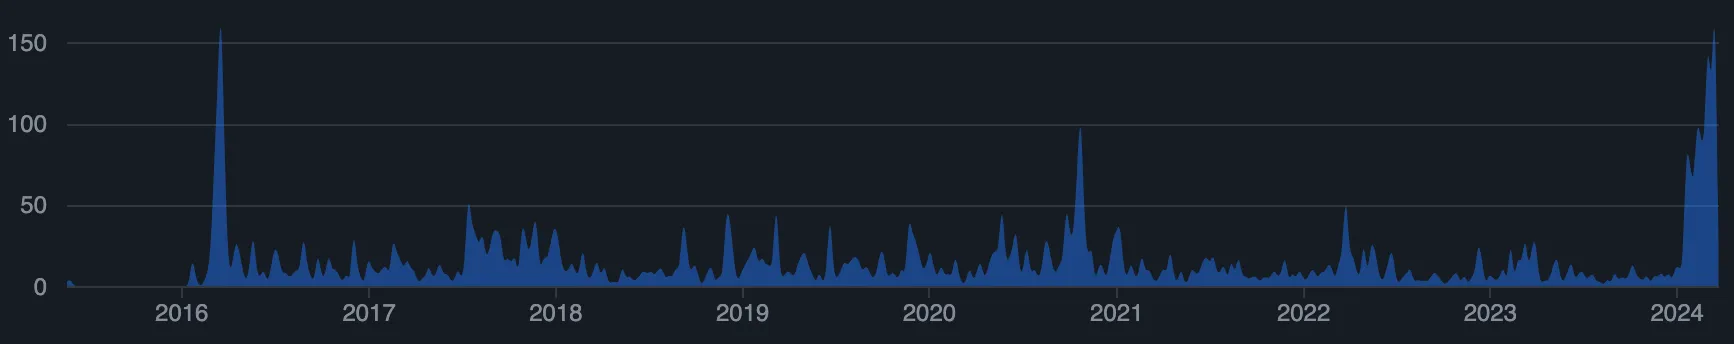 The commit history over the last 8 years